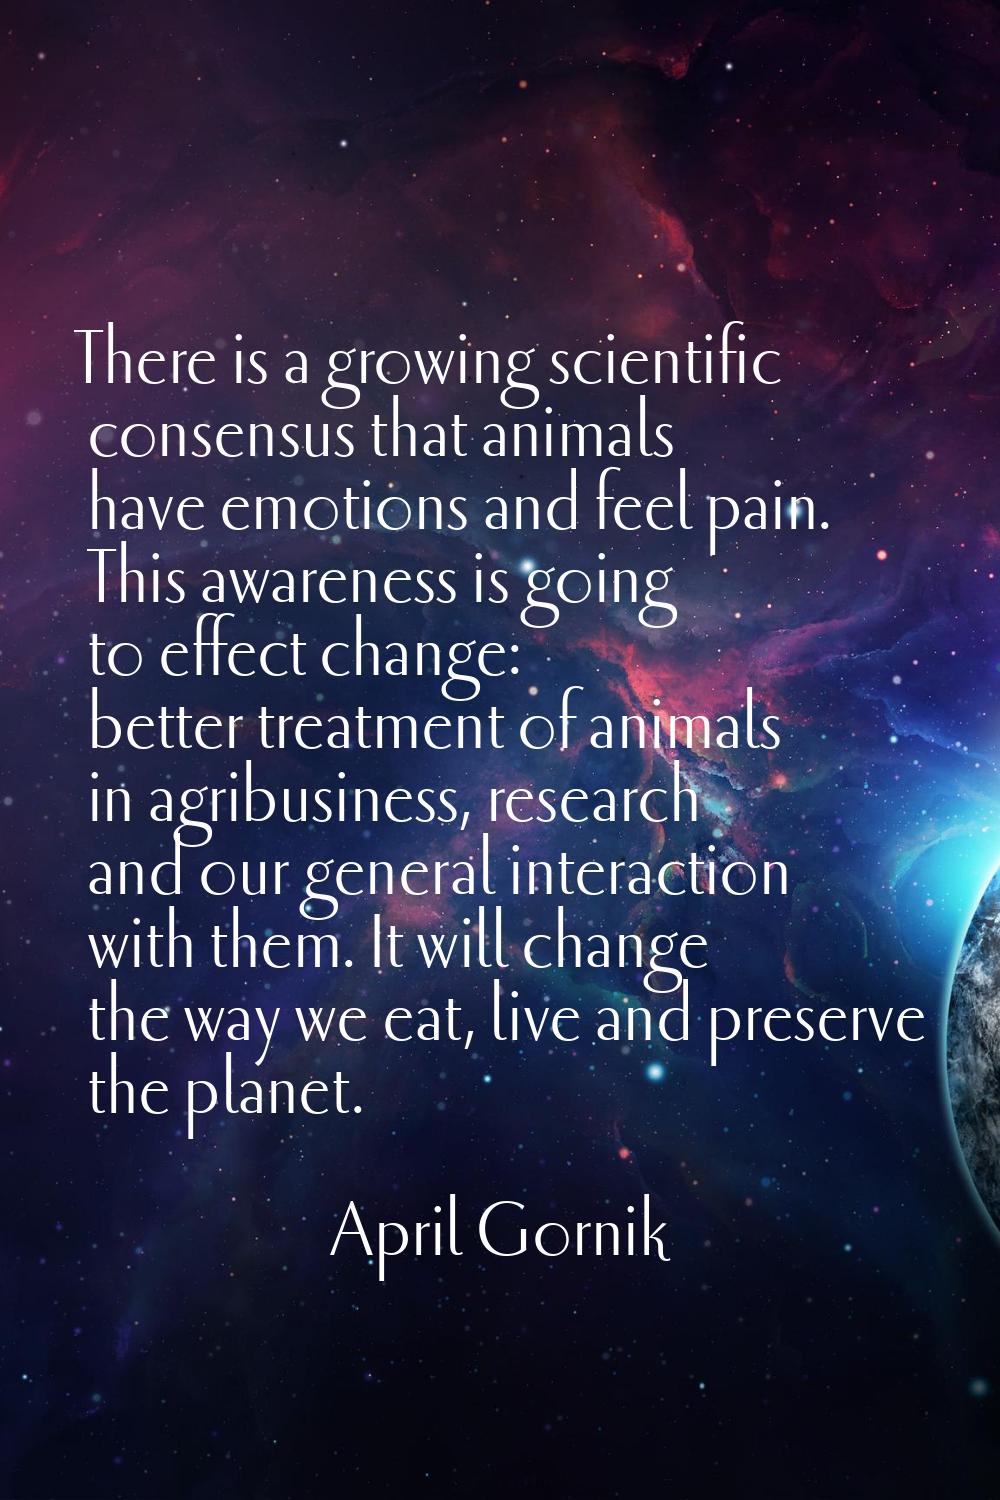 There is a growing scientific consensus that animals have emotions and feel pain. This awareness is